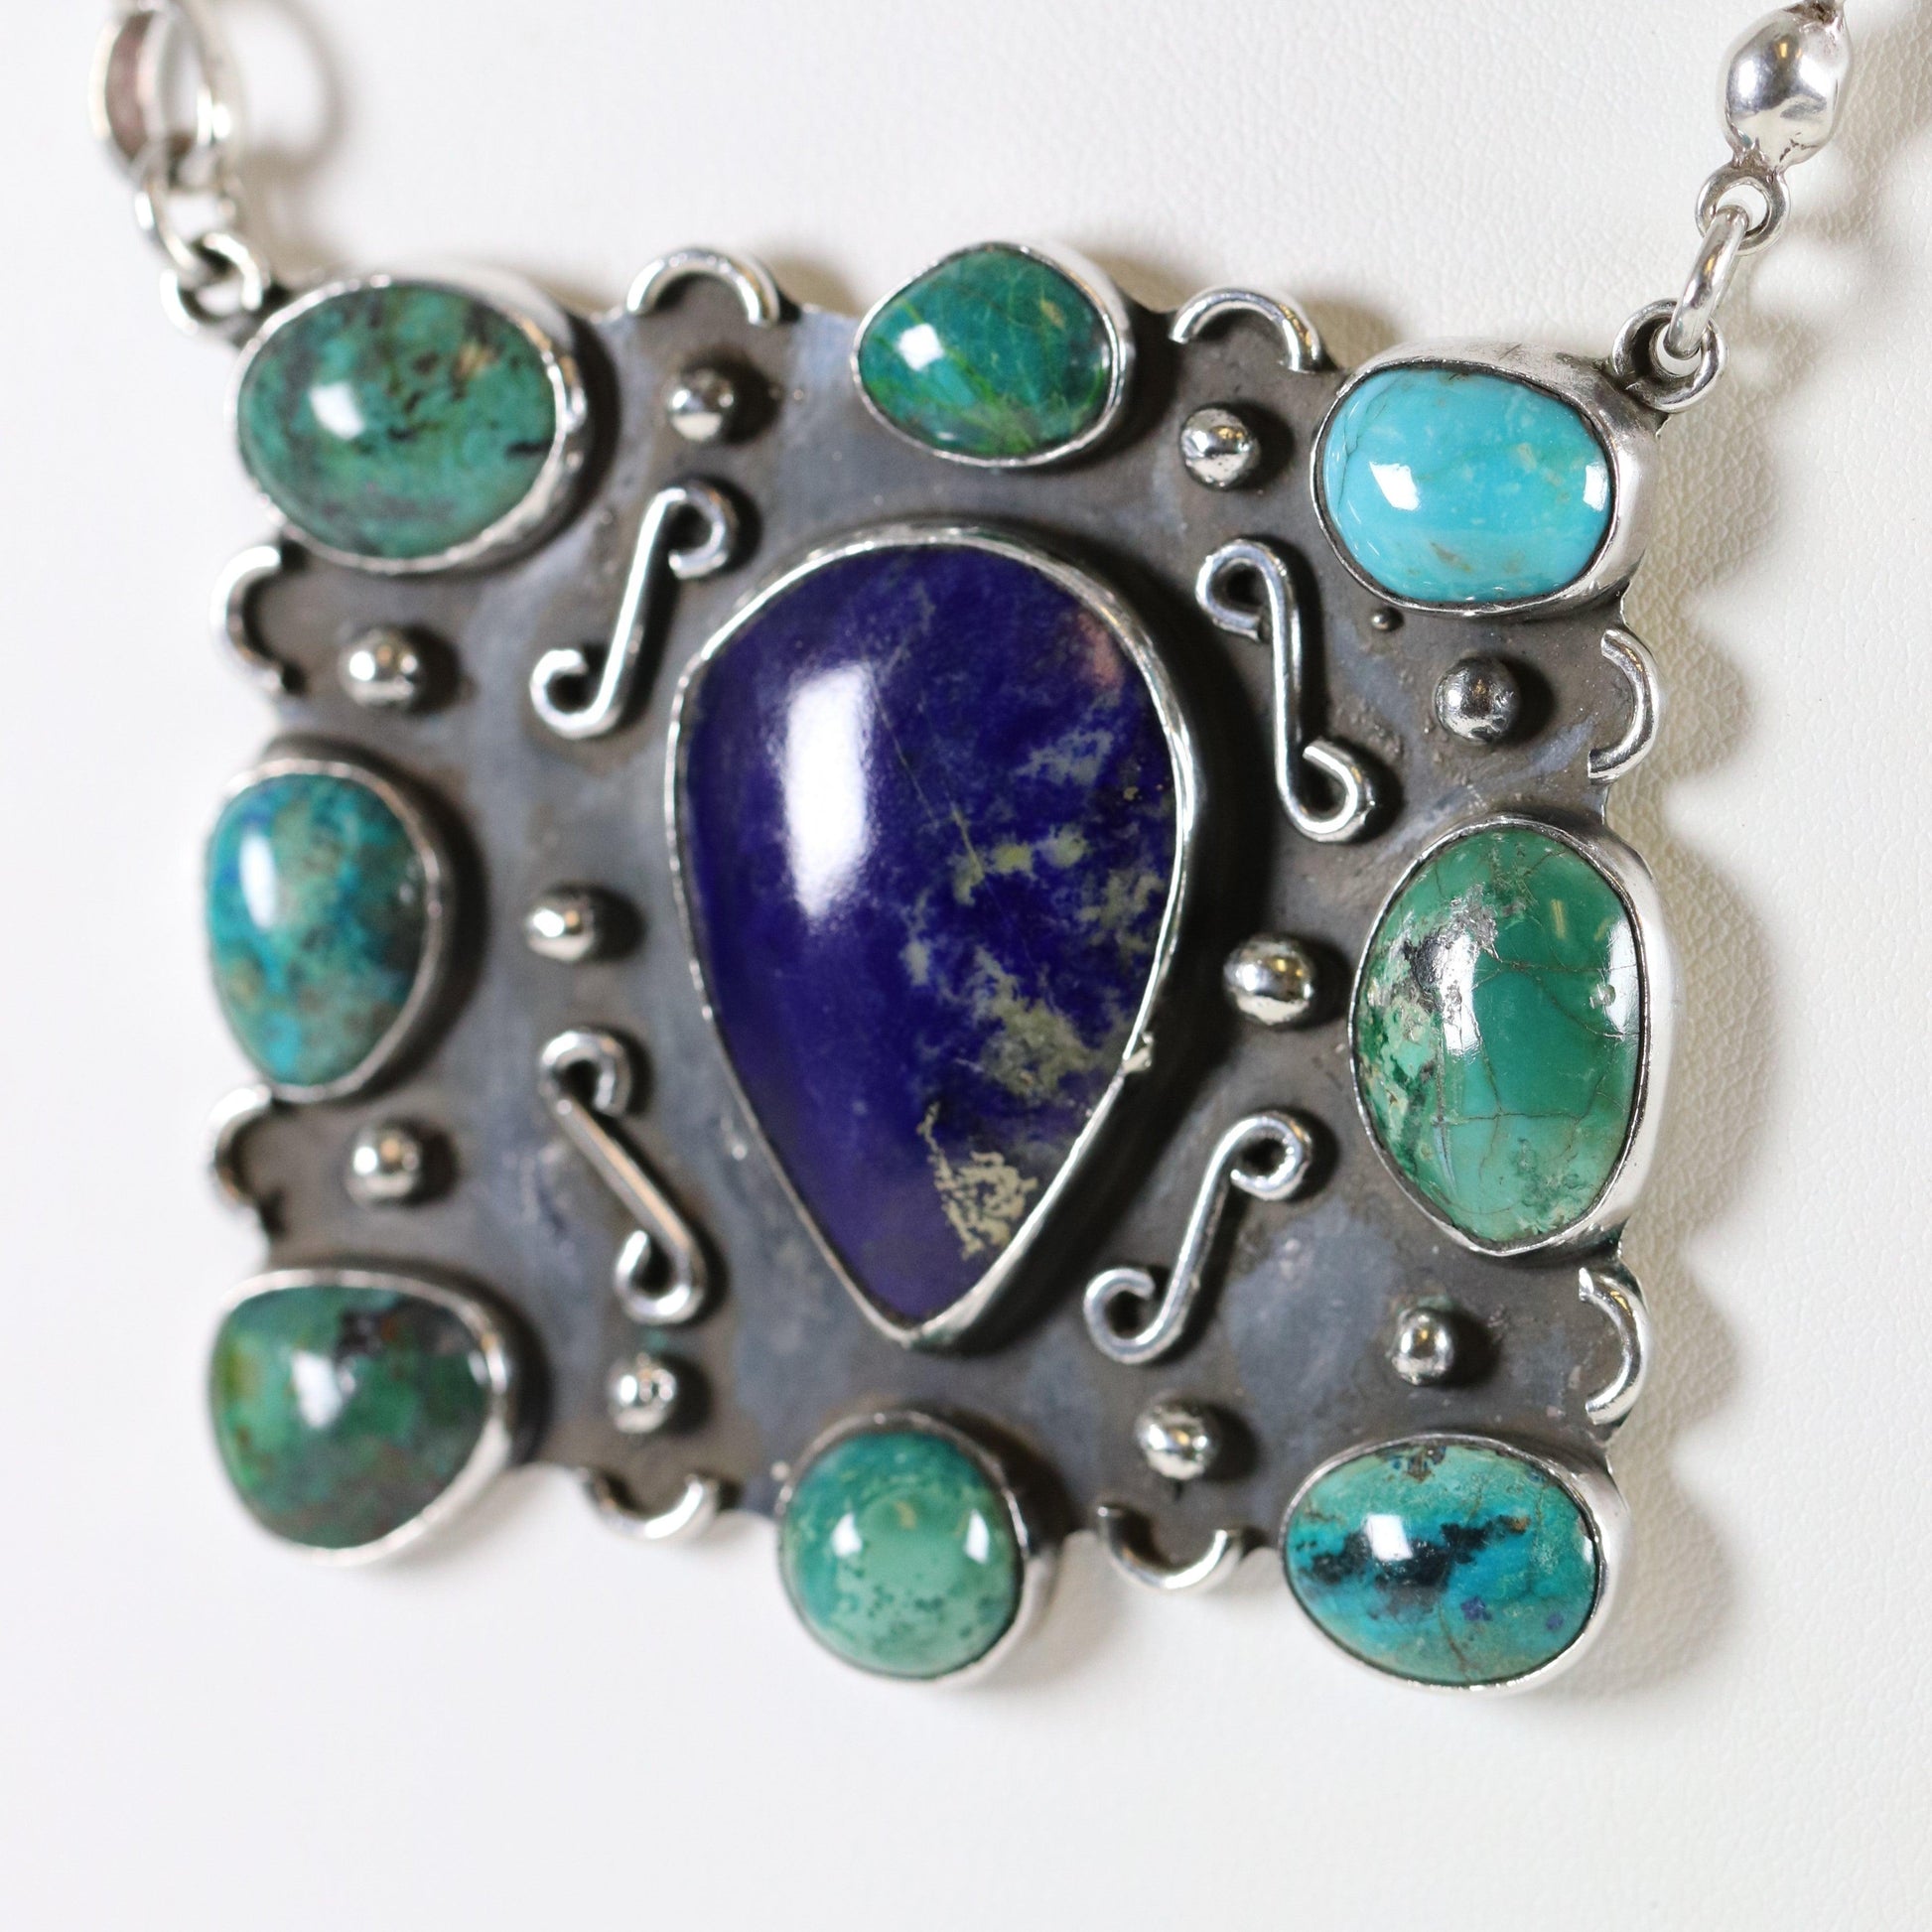 Vintage Handcrafted Silver Jewelry | Artisan Turquoise and Lapis Statement Necklace - Carmel Fine Silver Jewelry